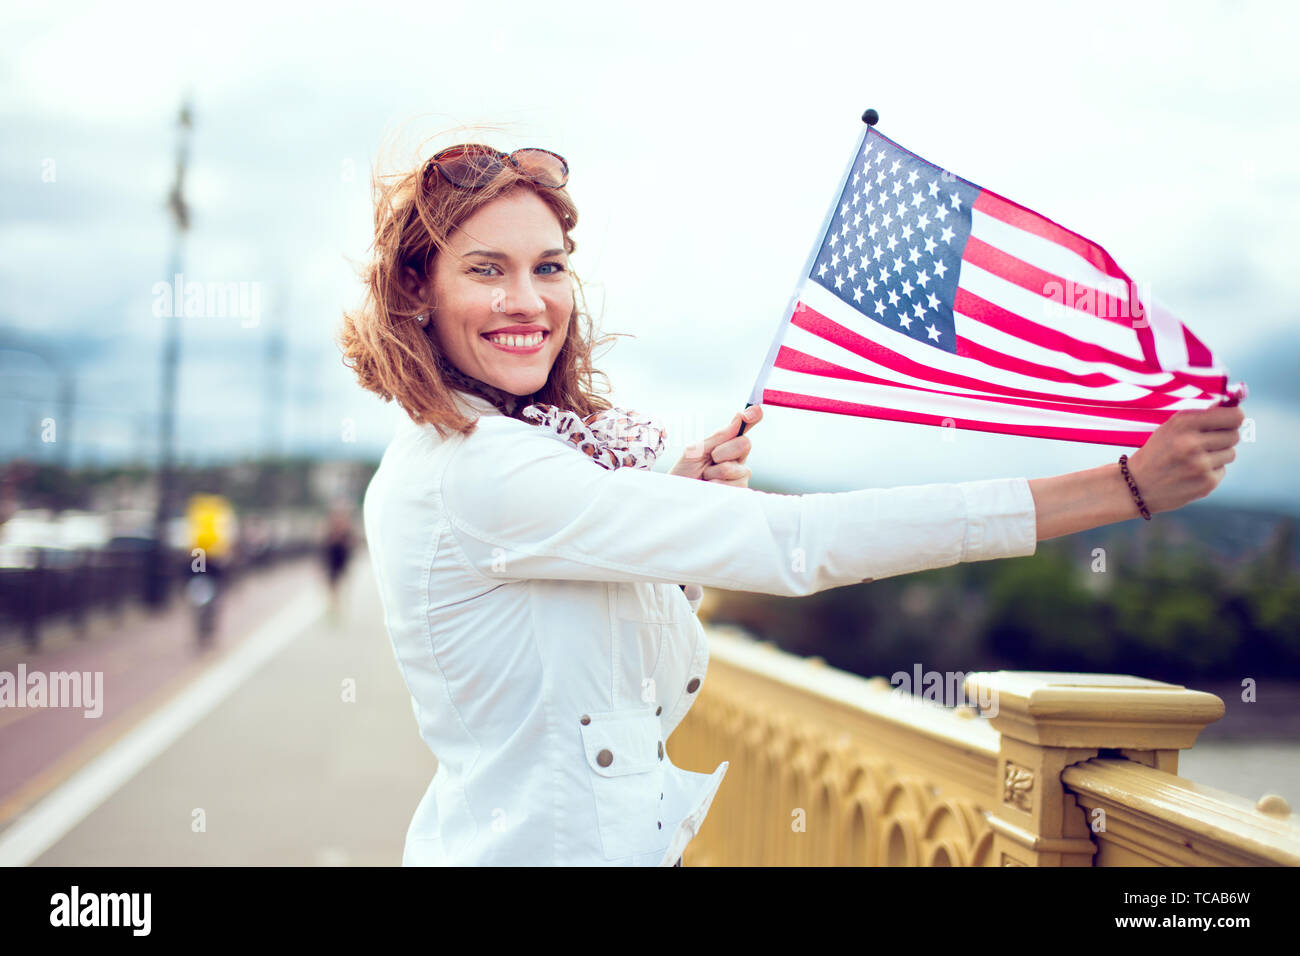 Happy young patriot urban woman with toothy smile enjoying stretching USA flag Stock Photo